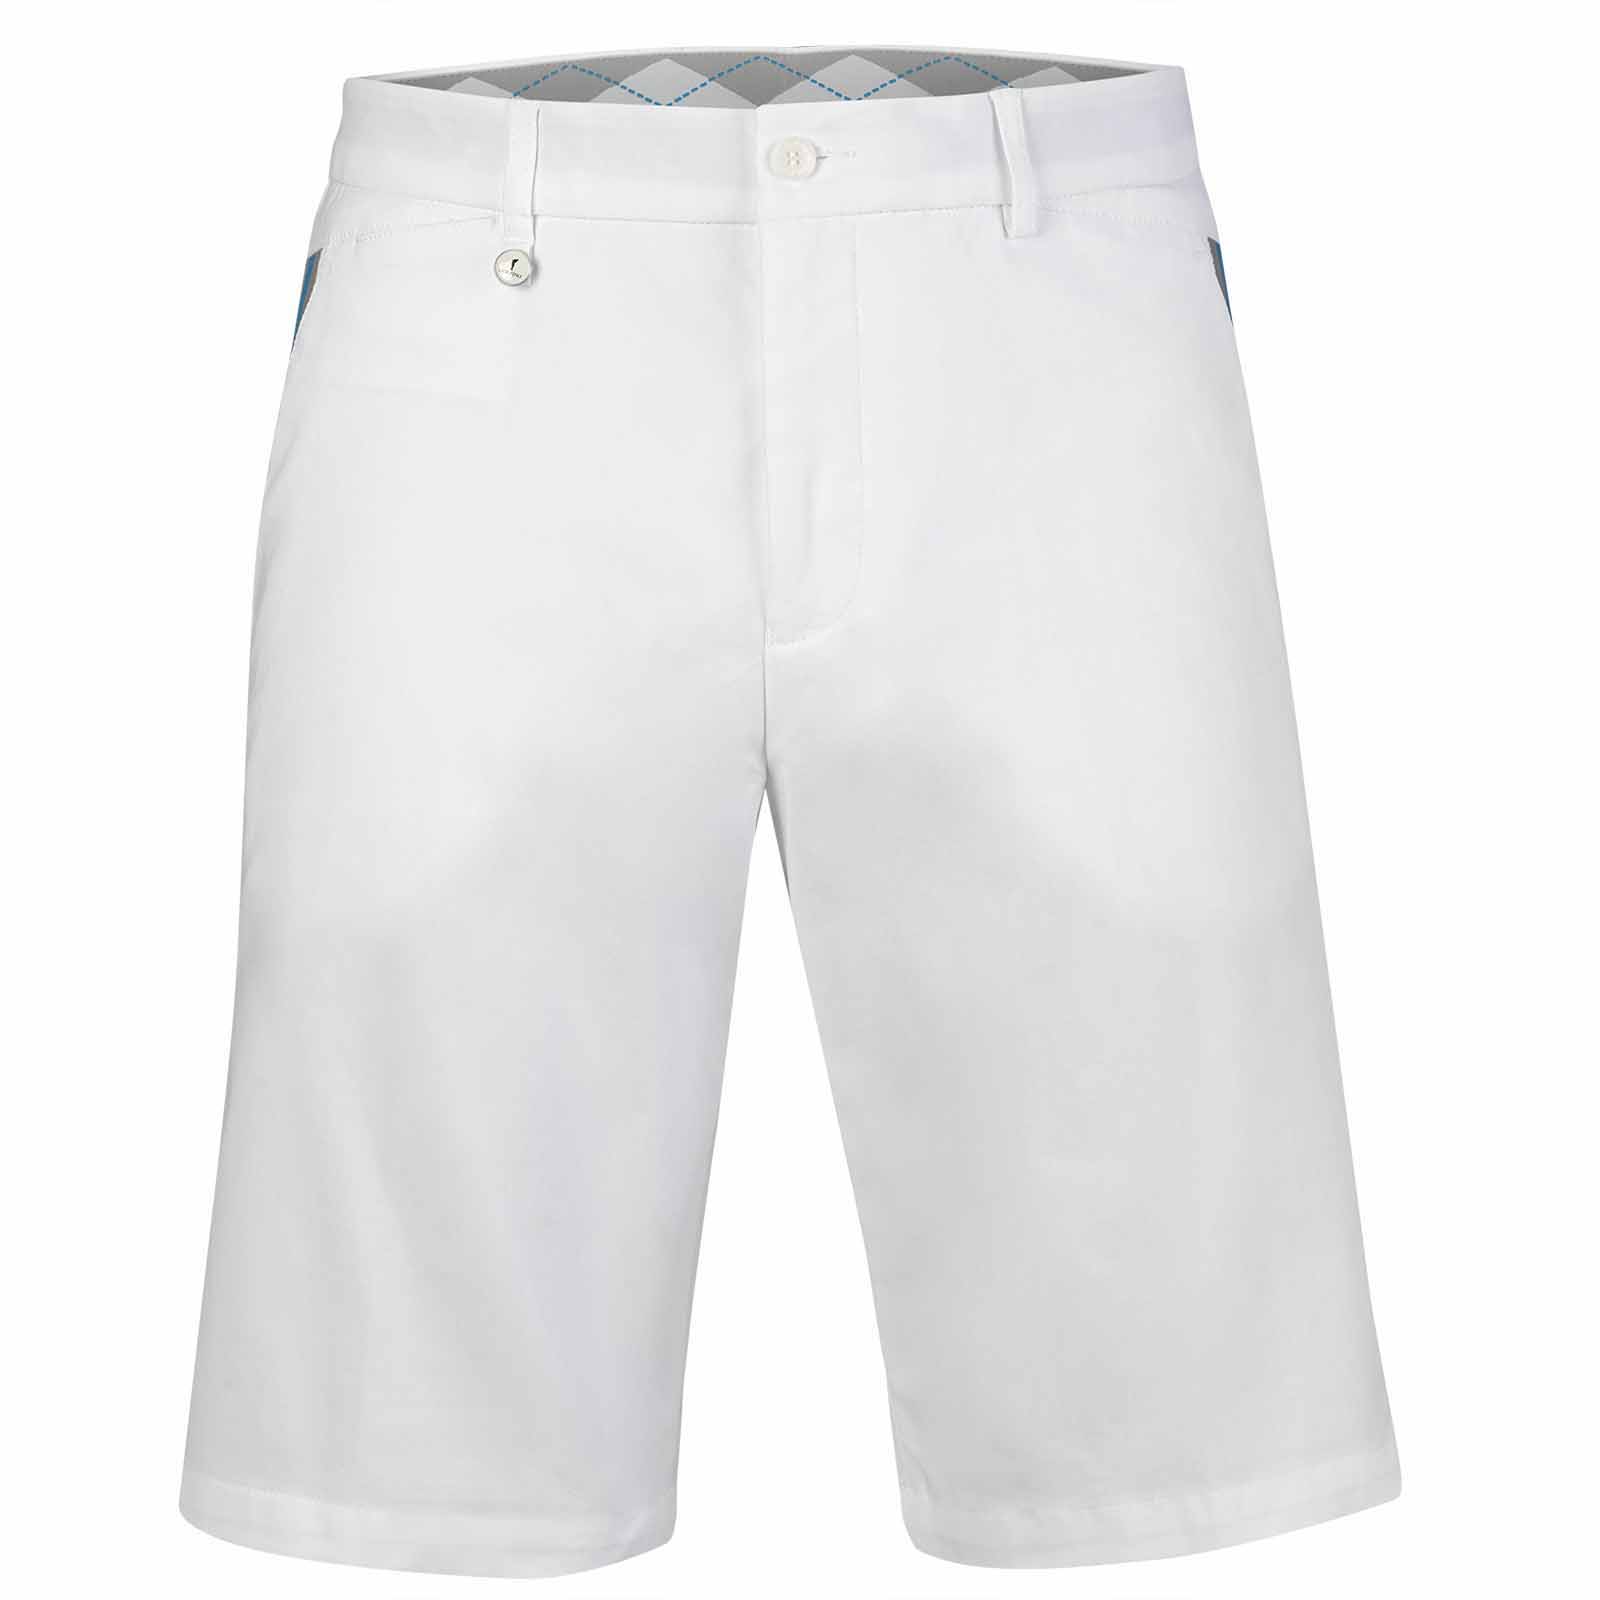 Men's golf shorts with sun protection and stretch comfort, made from a cotton blend